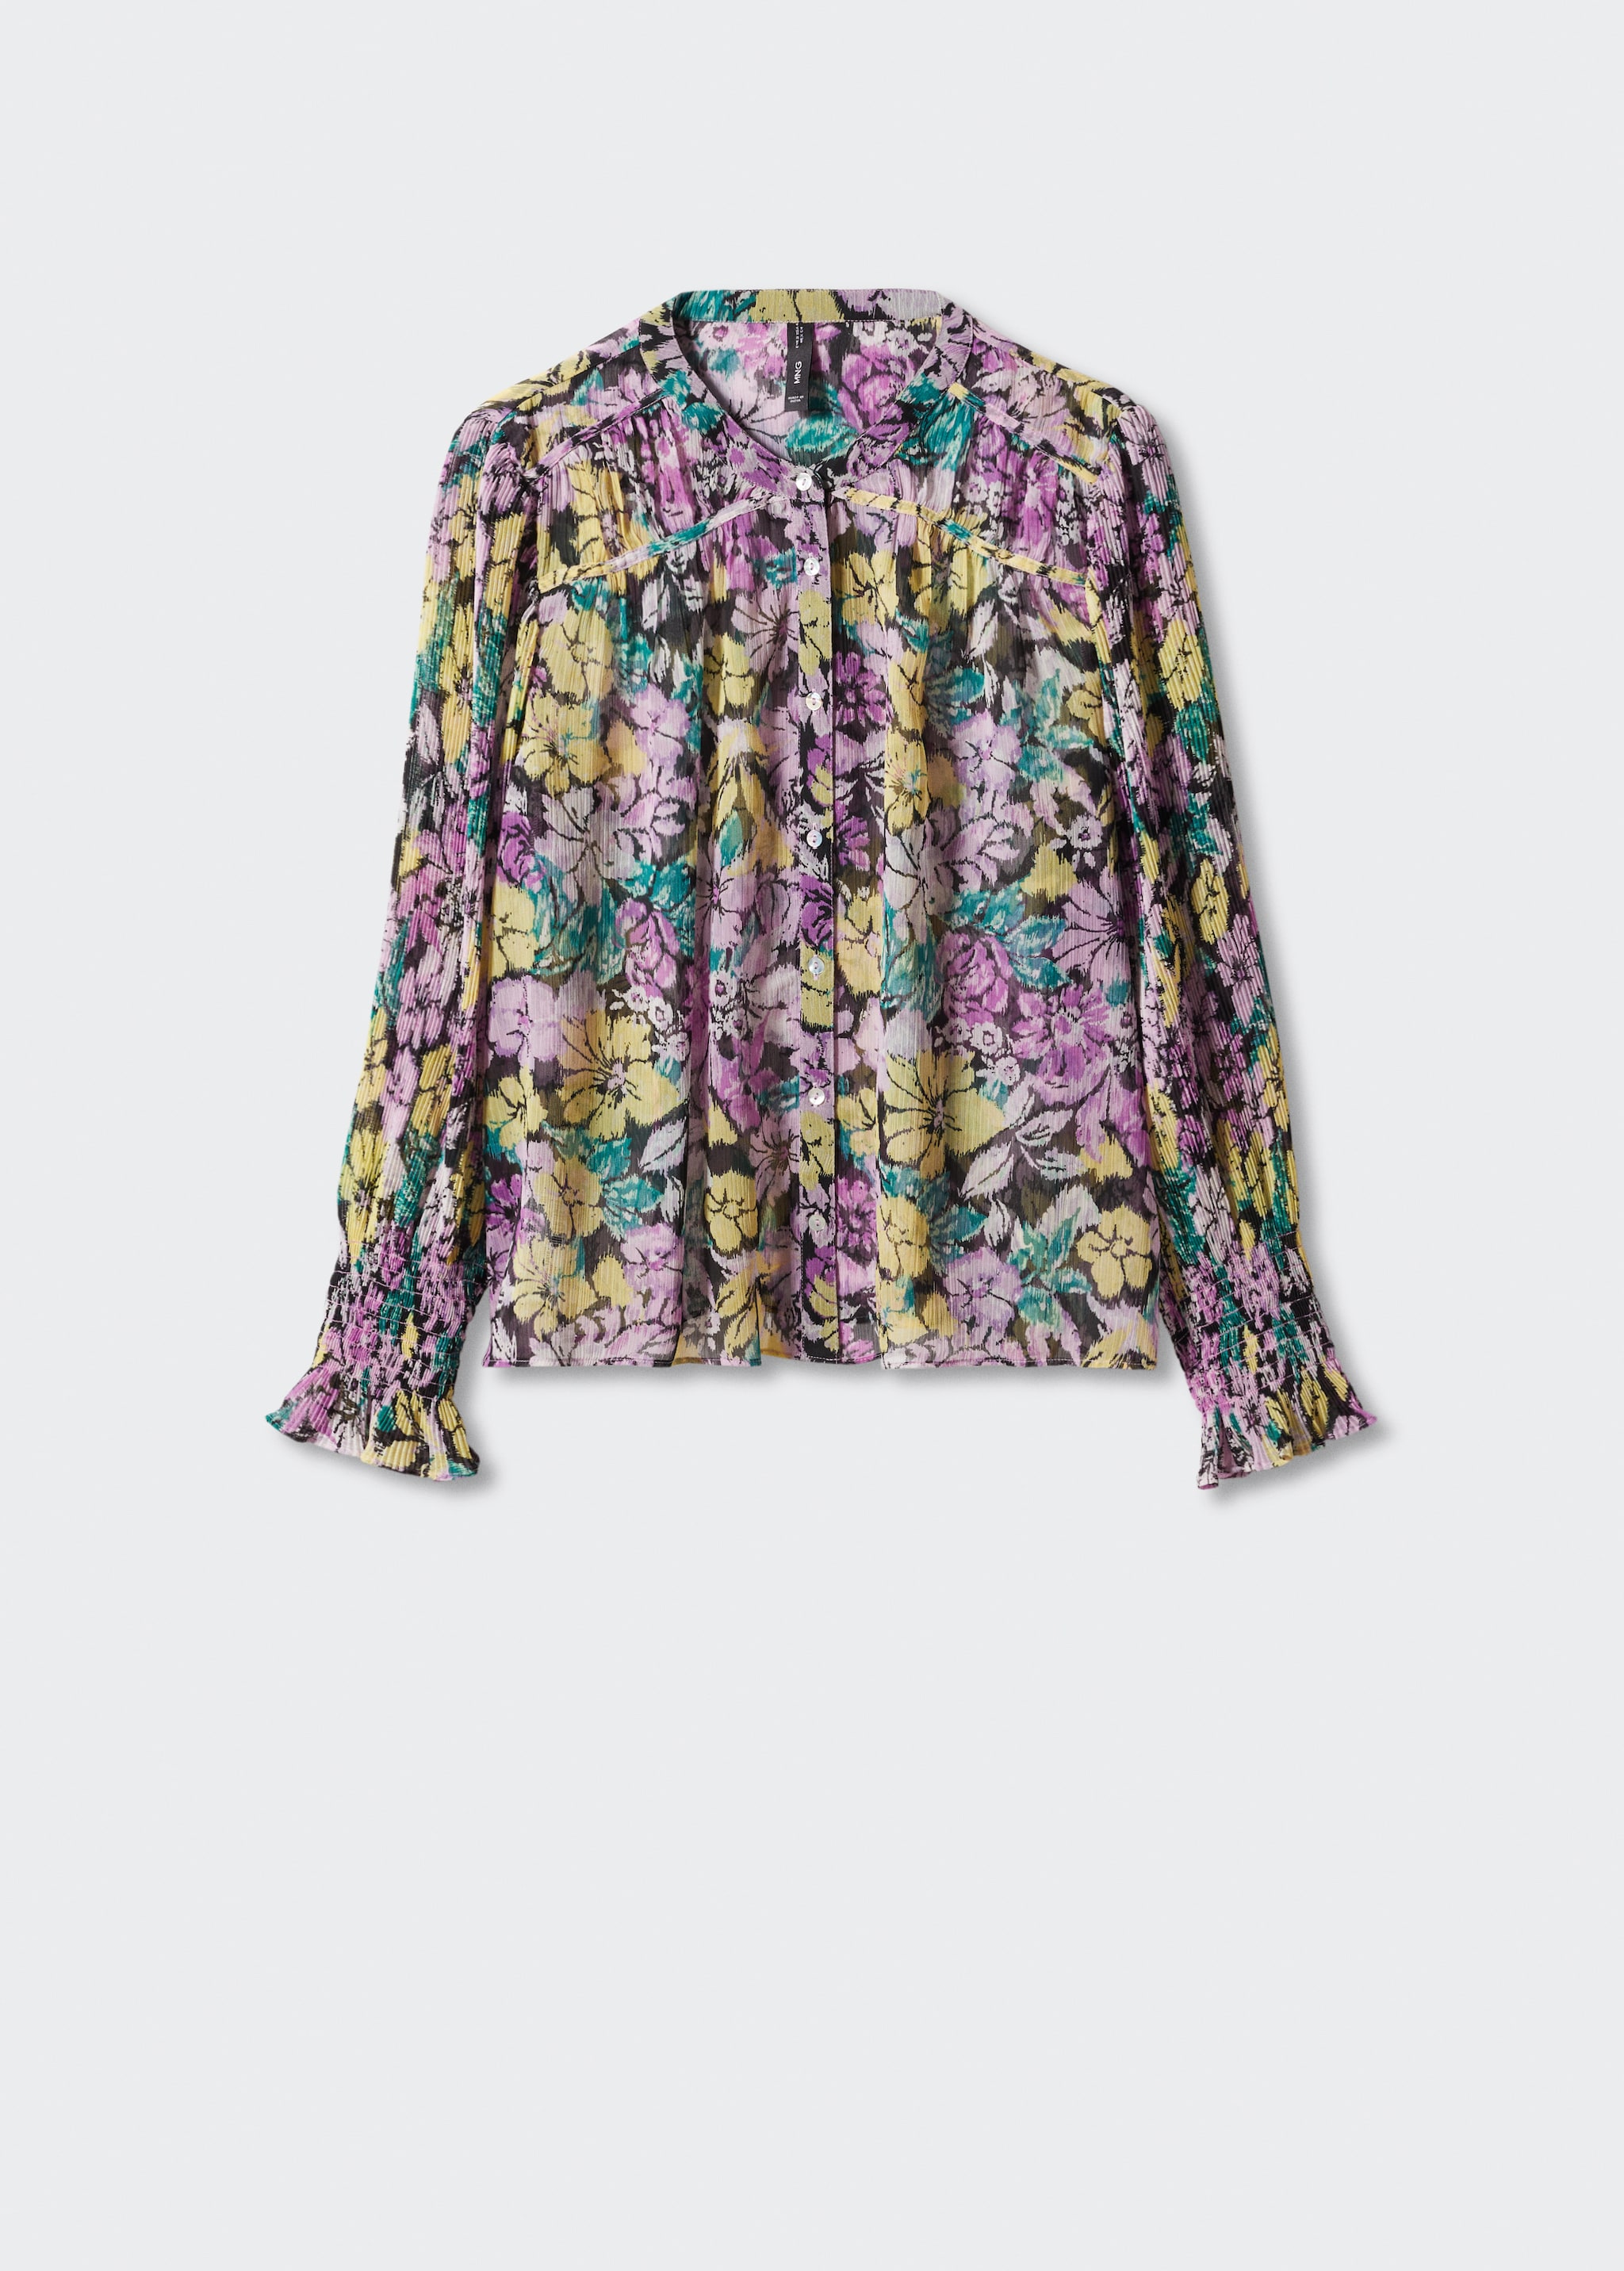 Floral textured blouse - Article without model